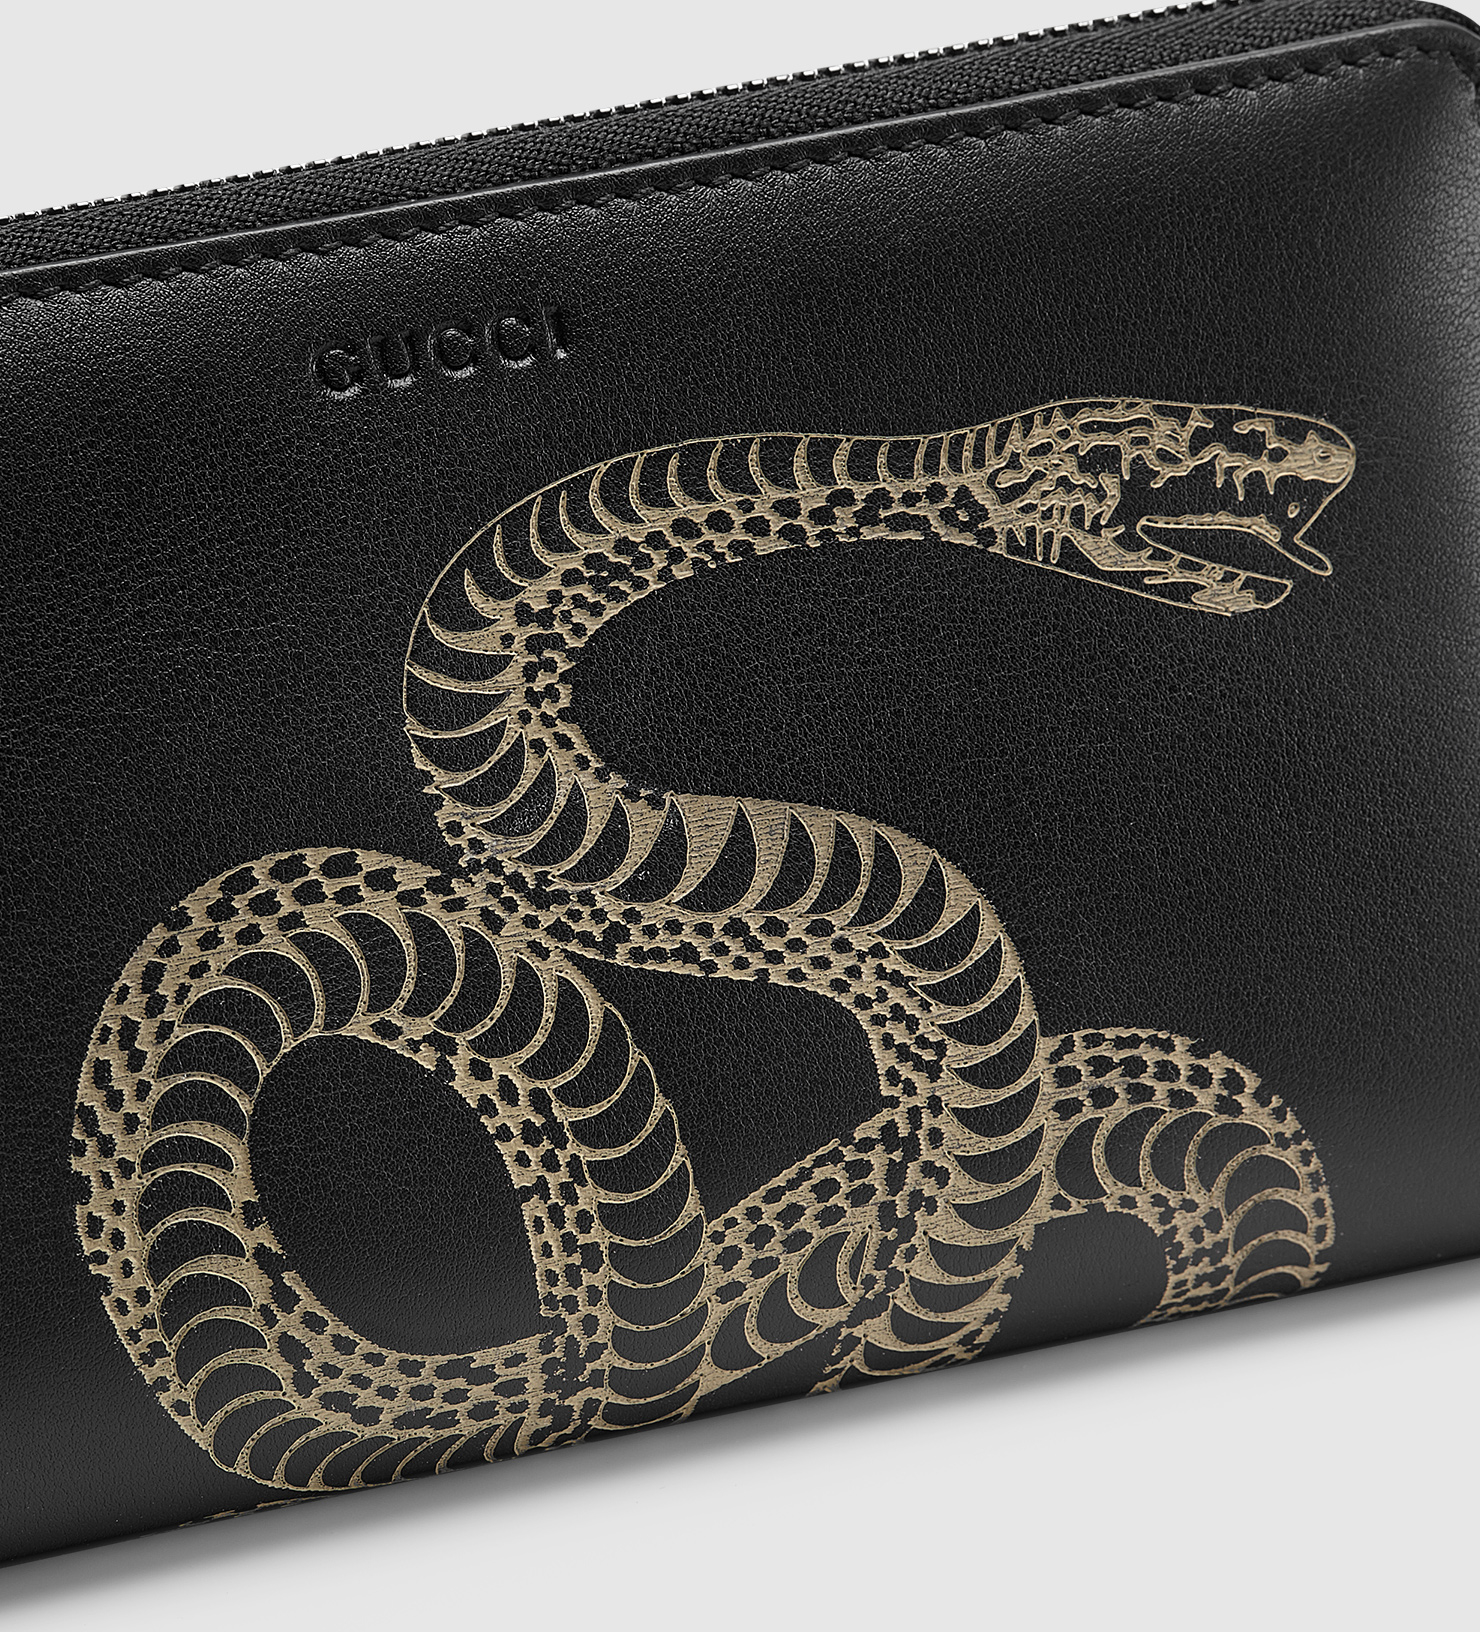 Lyst Gucci  Snake  Leather Chain Wallet  for Men